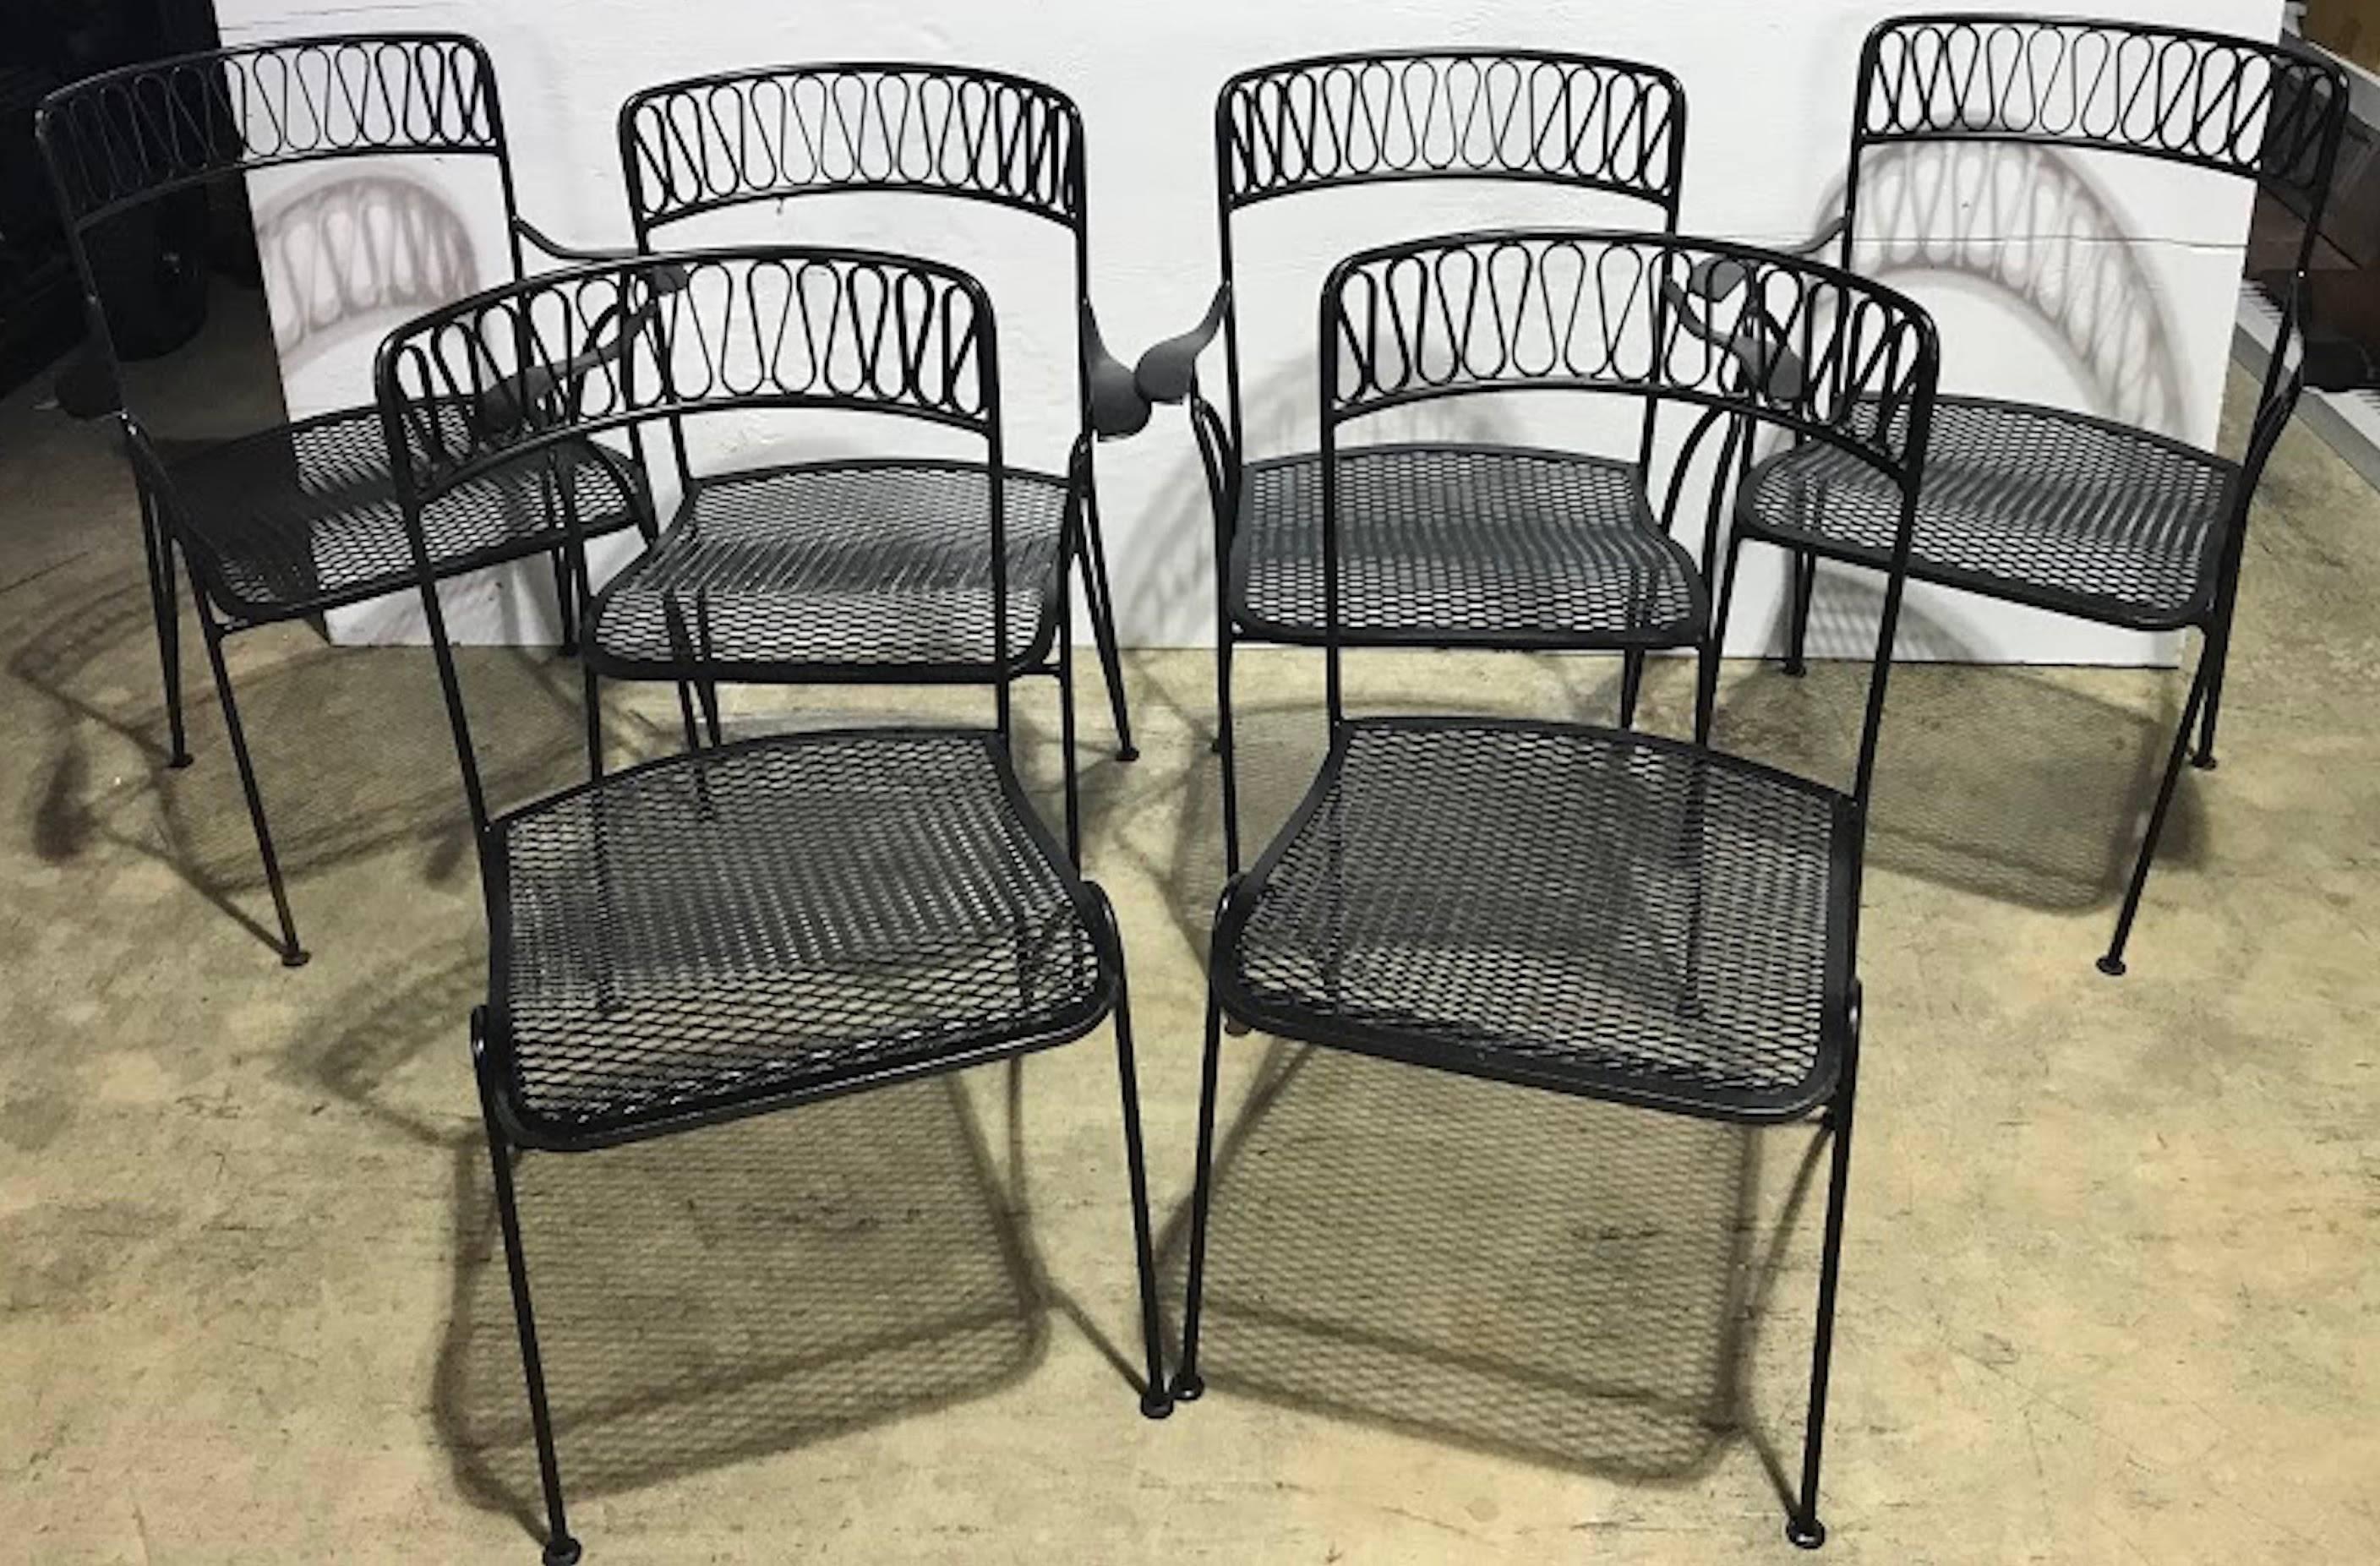 Four Salterini Ribbon Series Dining Chairs by Maurizio Tempestini, Restored 2